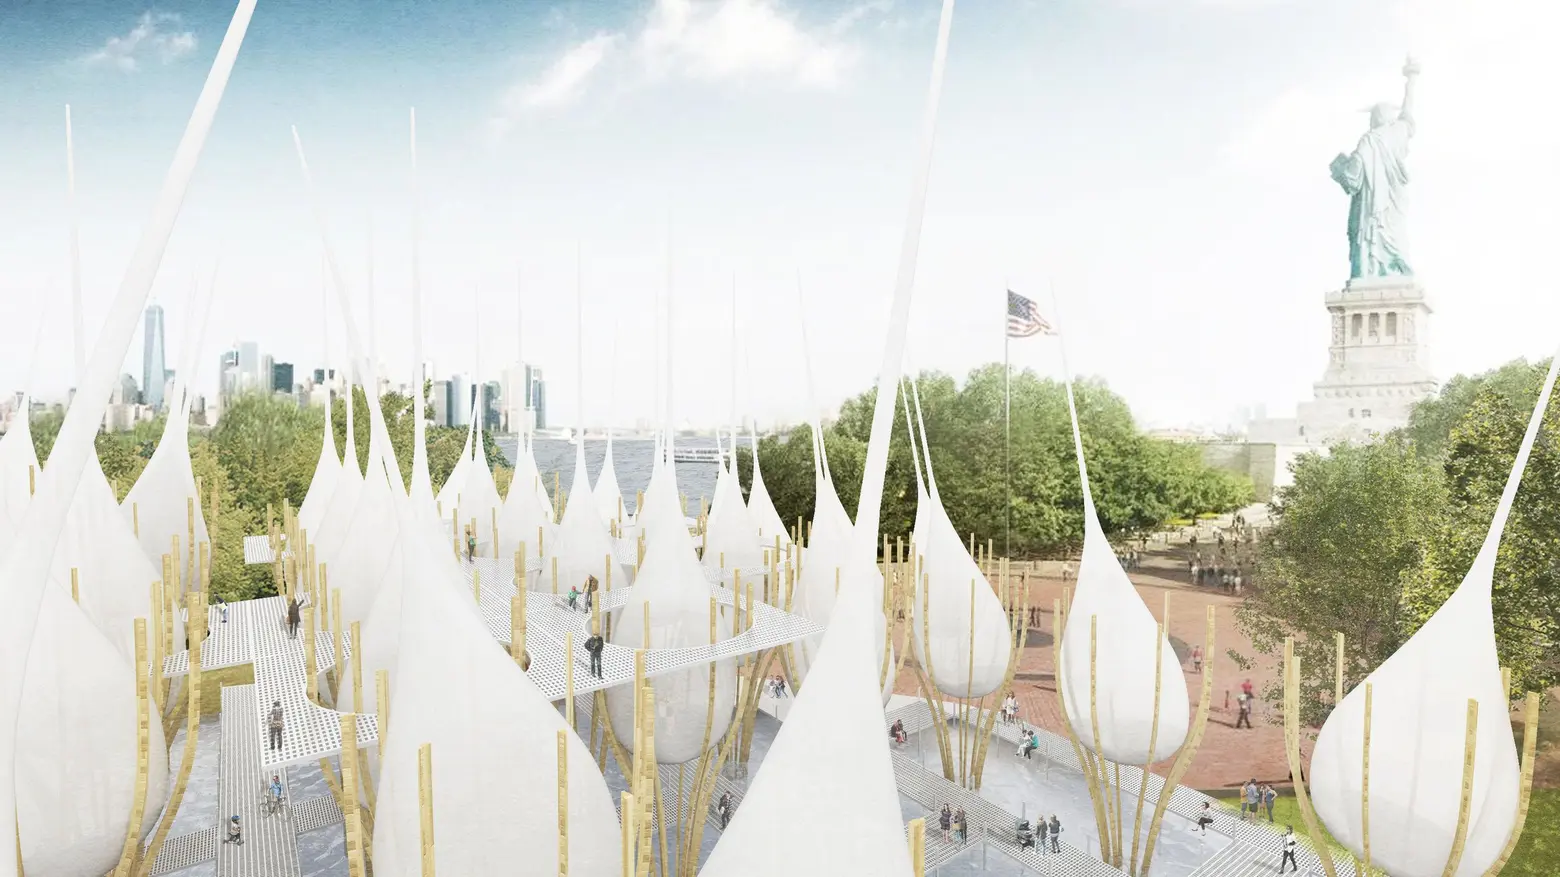 LIBERTY MUSEUM NEW YORK: Freedom to the people, Social Justice Media, Statue of Liberty Museum, Jungwoo Ji, Bosuk Hur, Suk Lee, NYC design competition